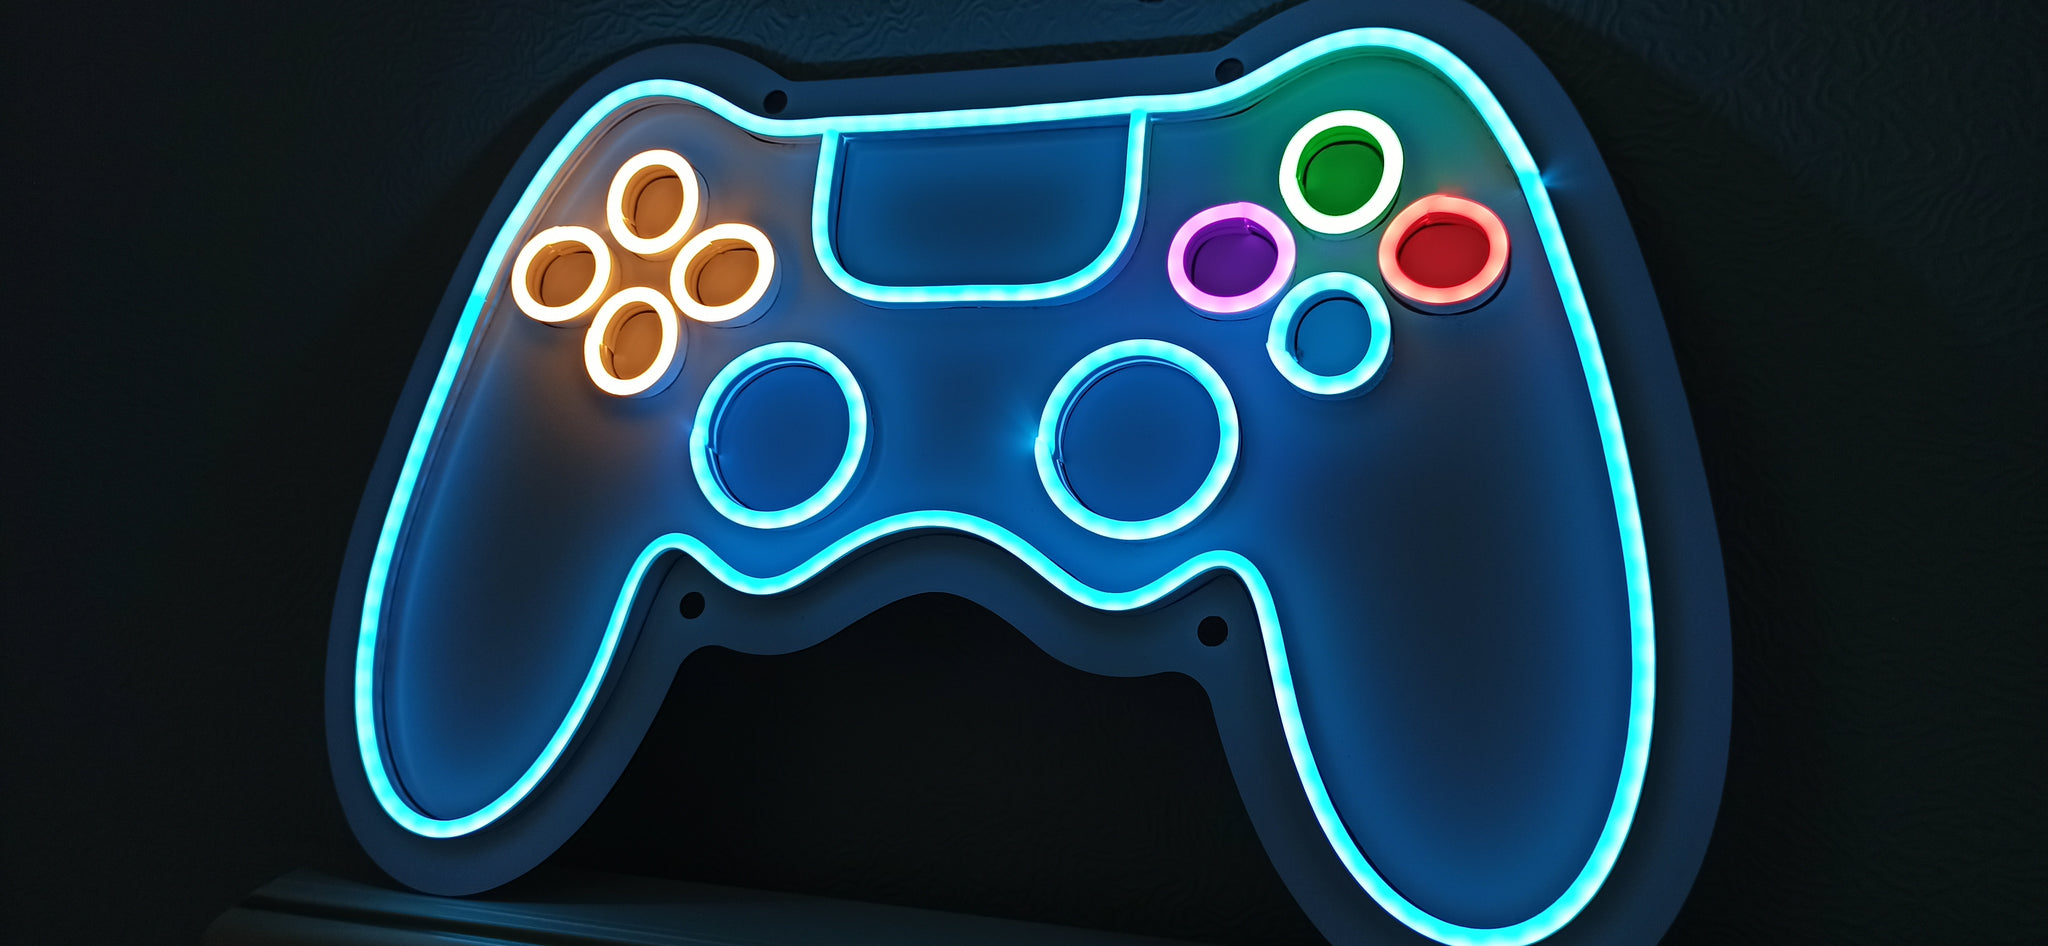 Game Controller PS LED neon sign, Joystick Neon Sign – Ooh neon